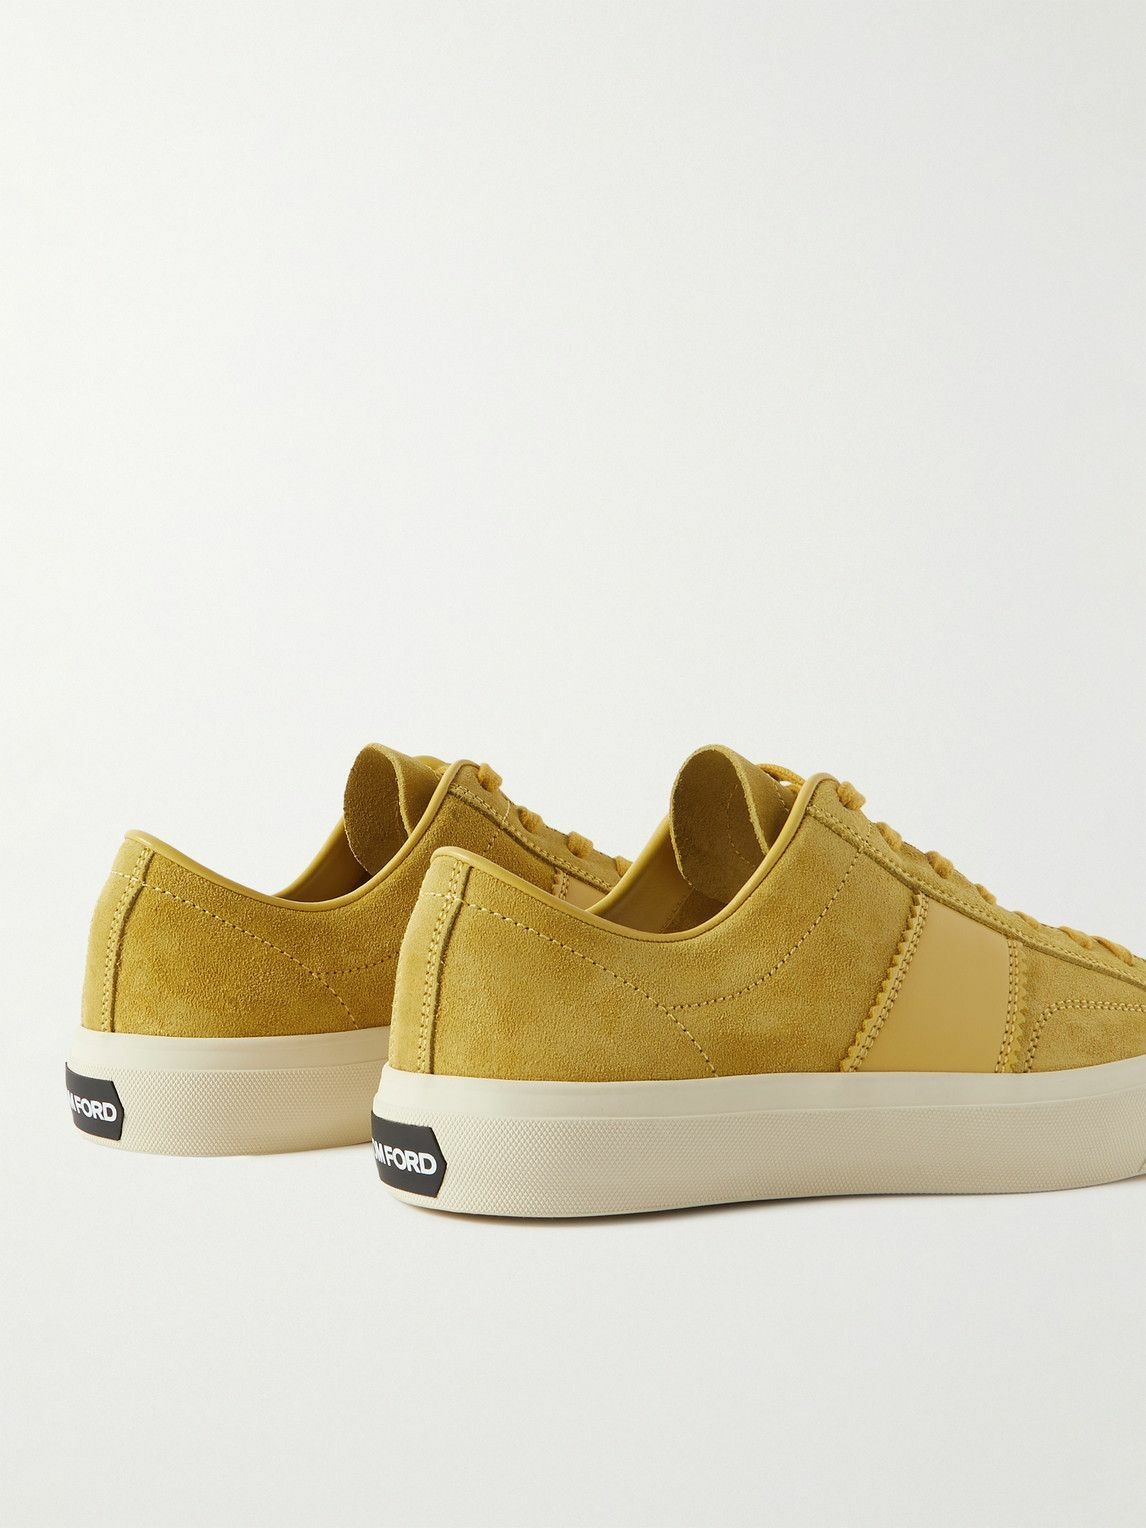 TOM FORD - Cambridge Leather-Trimmed Suede Sneakers - Yellow TOM FORD